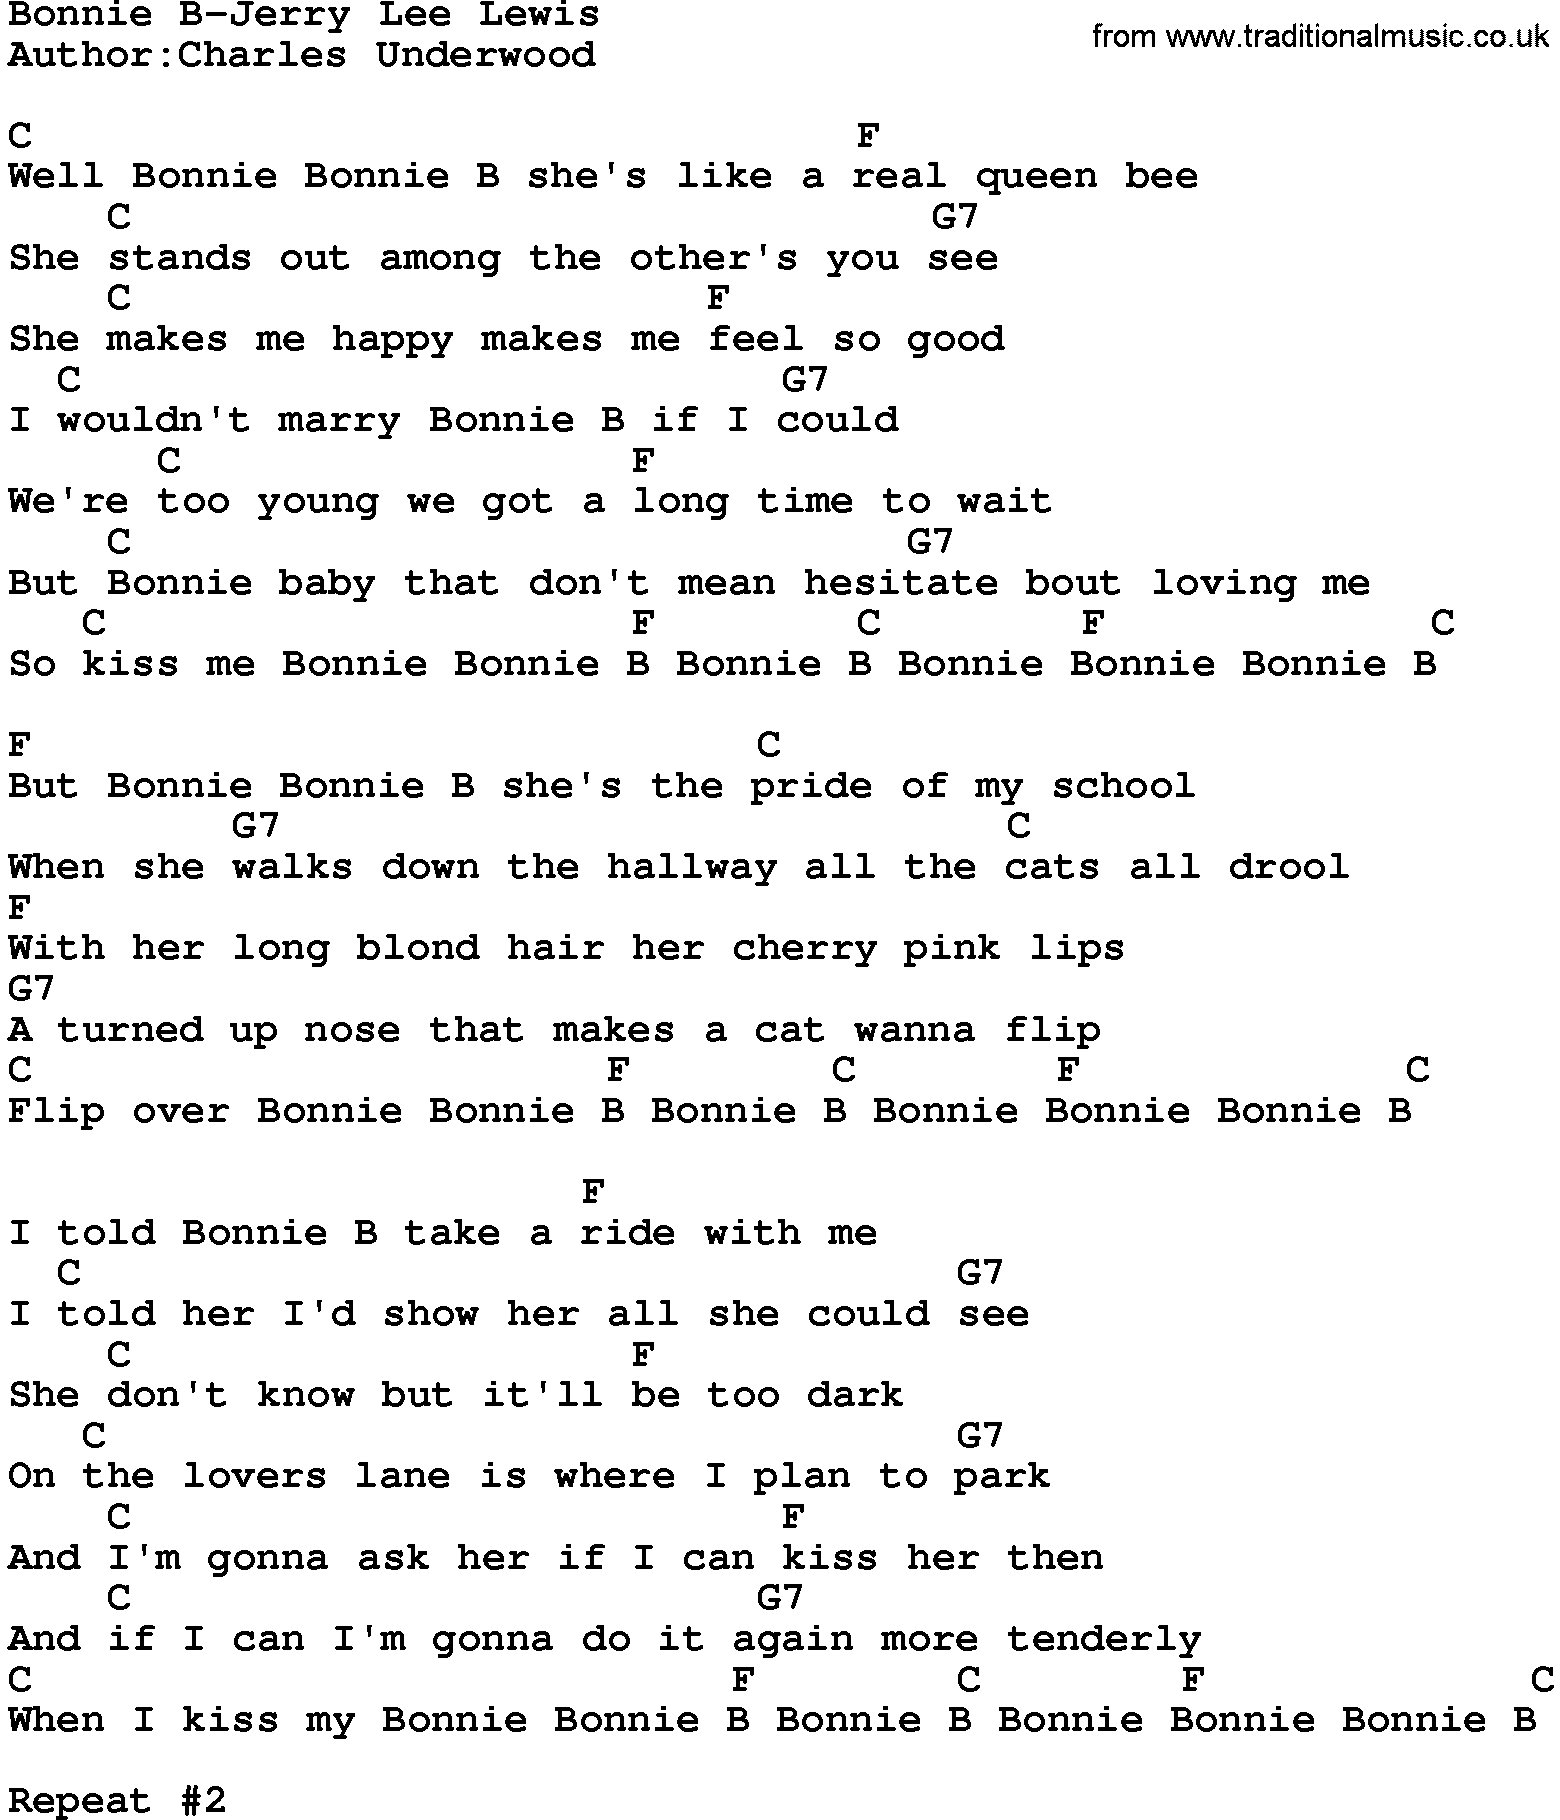 Country music song: Bonnie B-Jerry Lee Lewis lyrics and chords